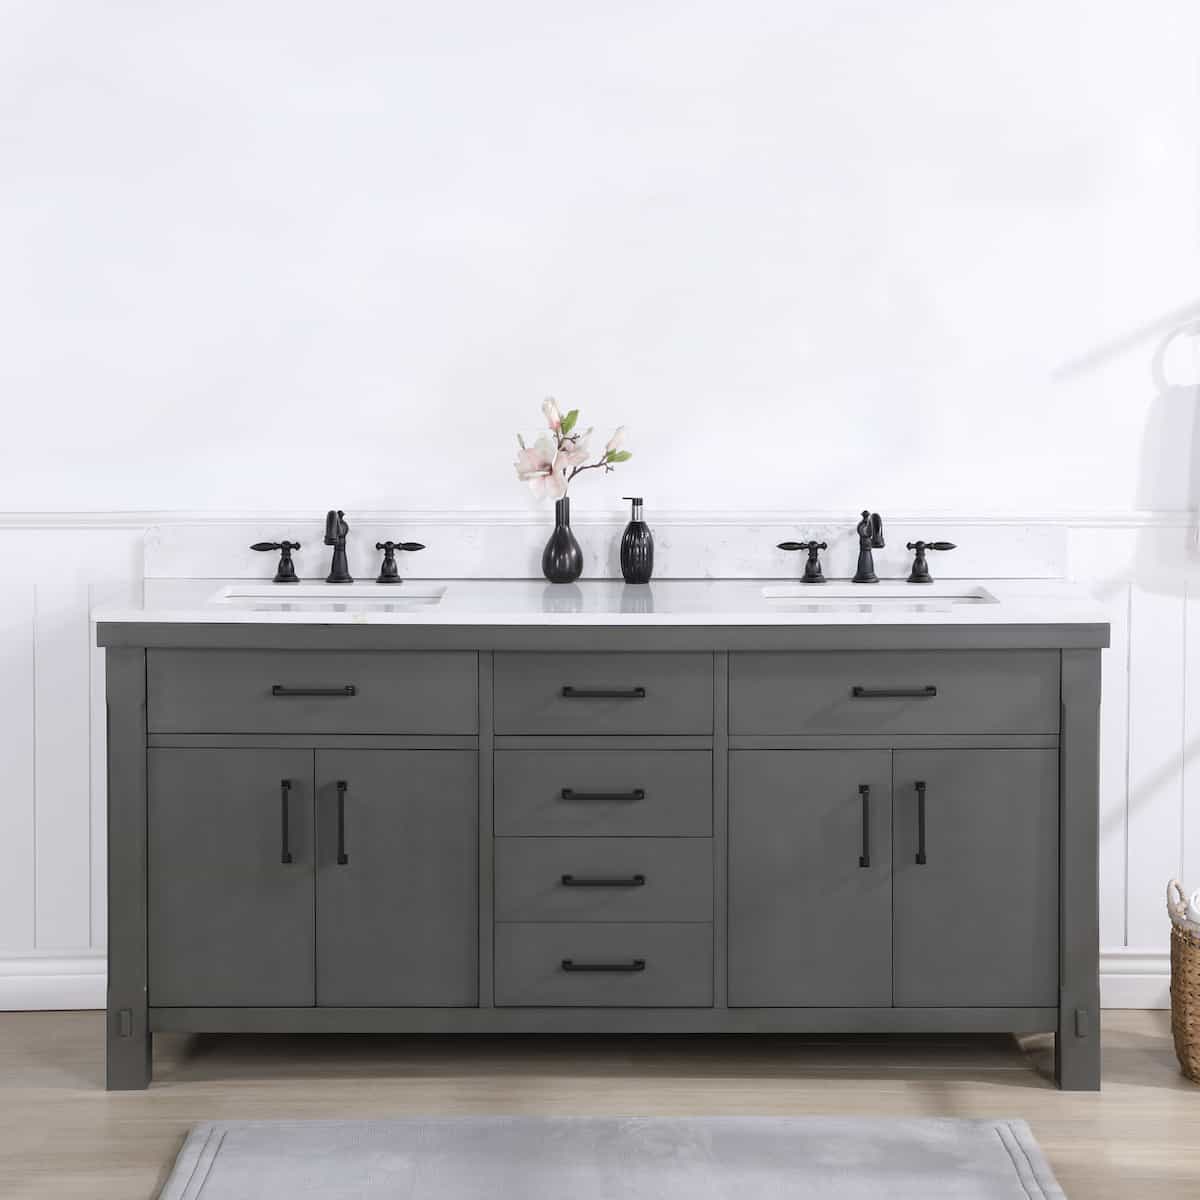 Vinnova Viella 72 Inch Freestanding Double Sink Bath Vanity in Rust Grey Finish with White Composite Countertop Without Mirror in Bathroom 701872-RU-WS-NM